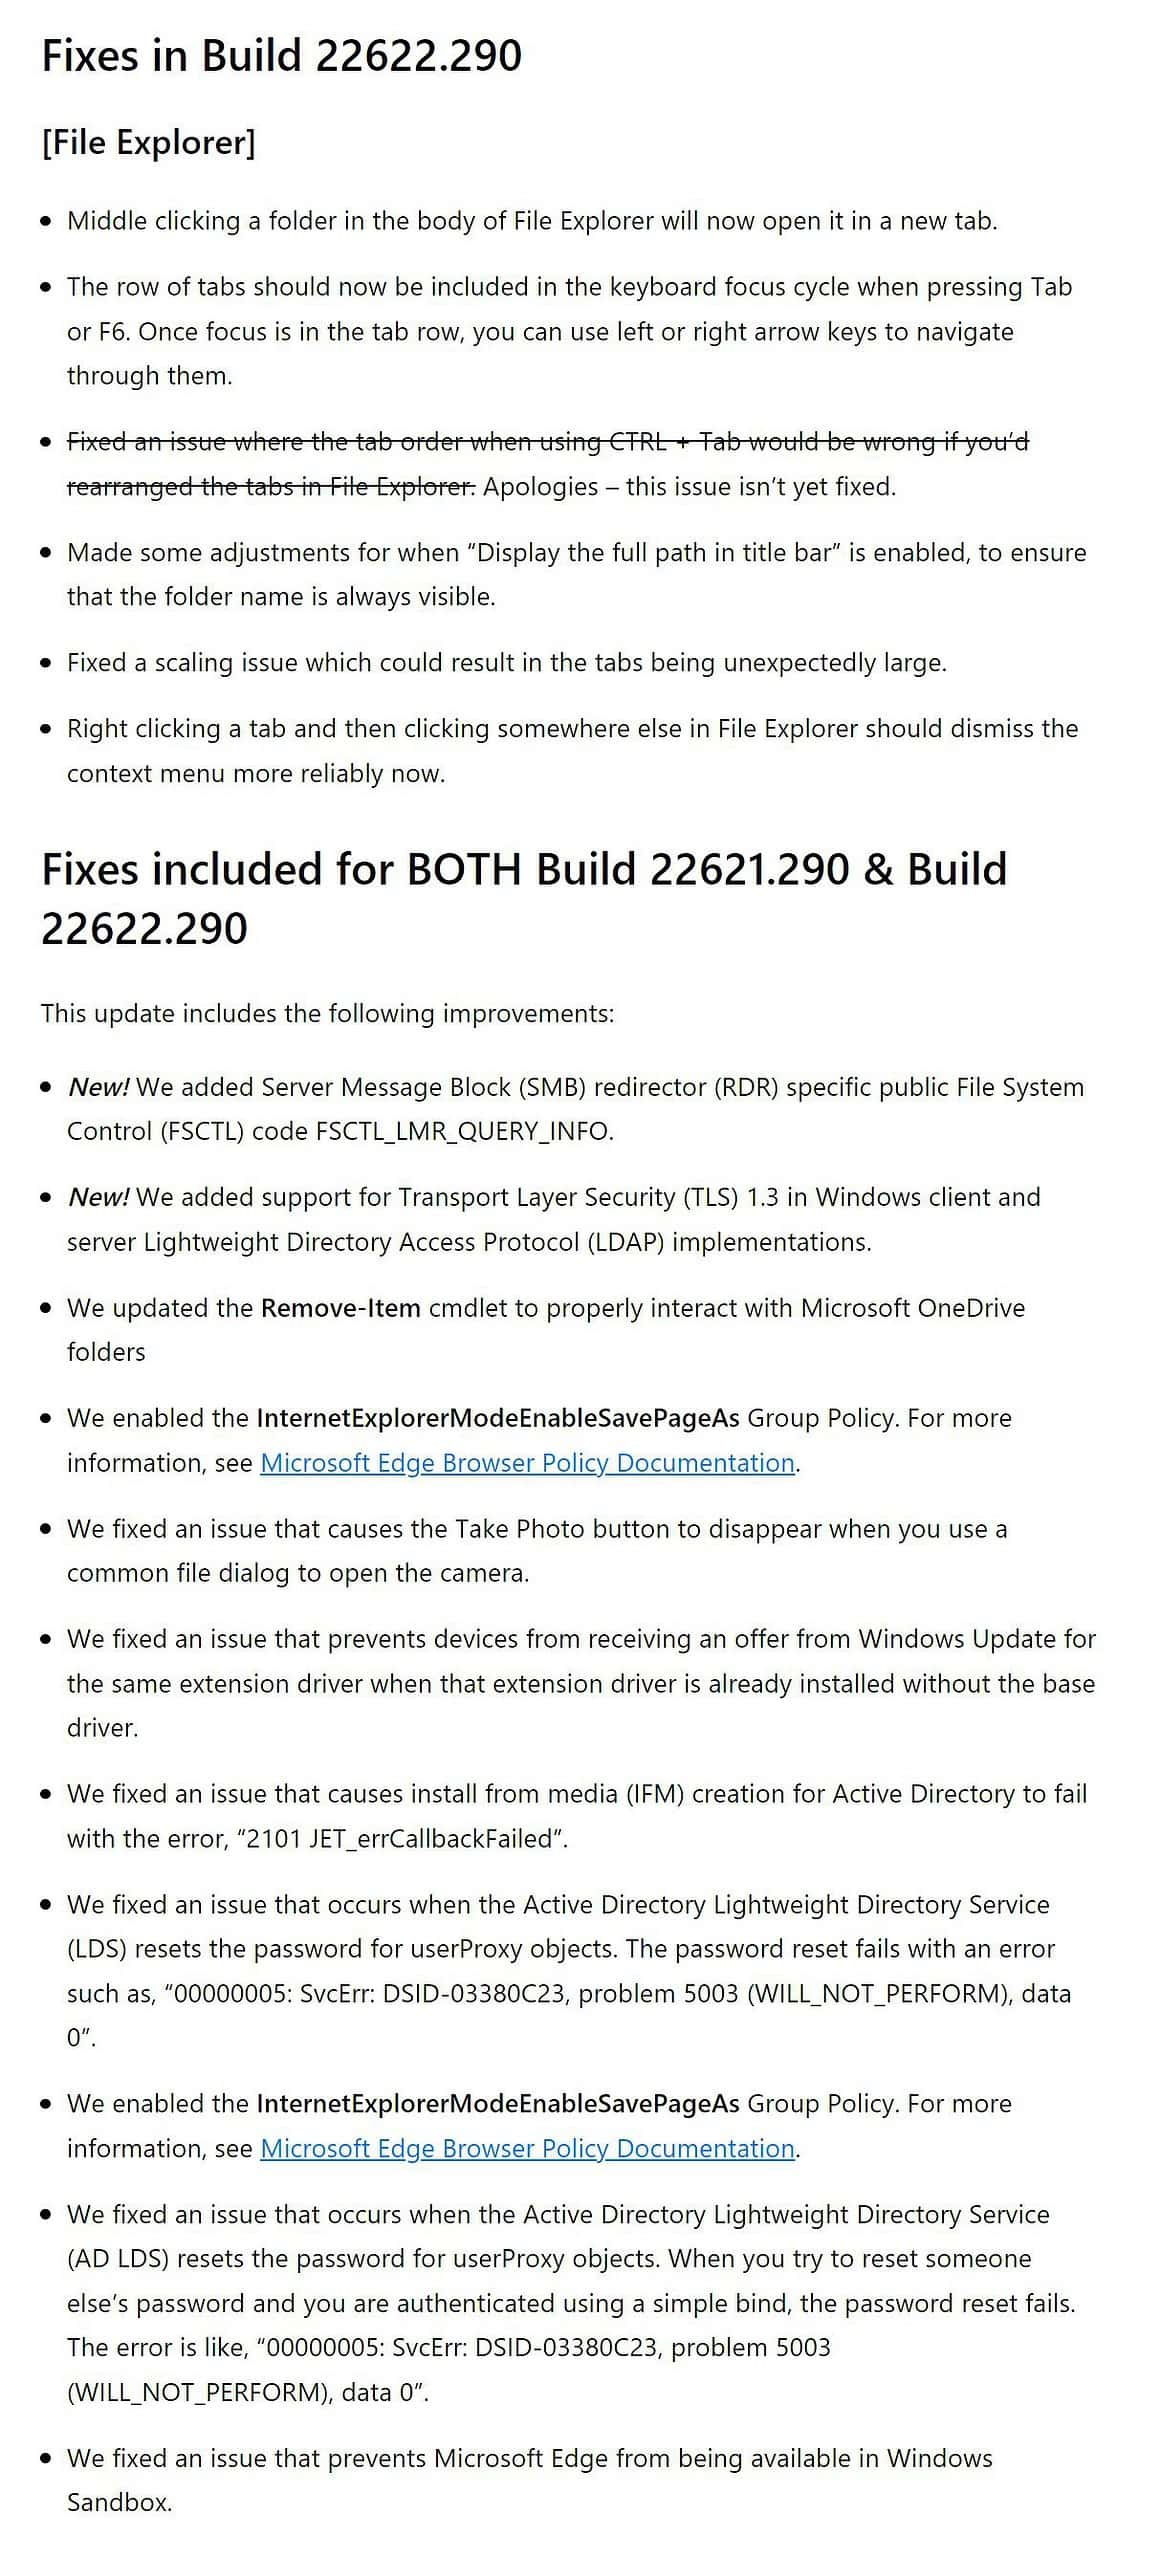 Windows 11 Build 22621.290 and 22622.290